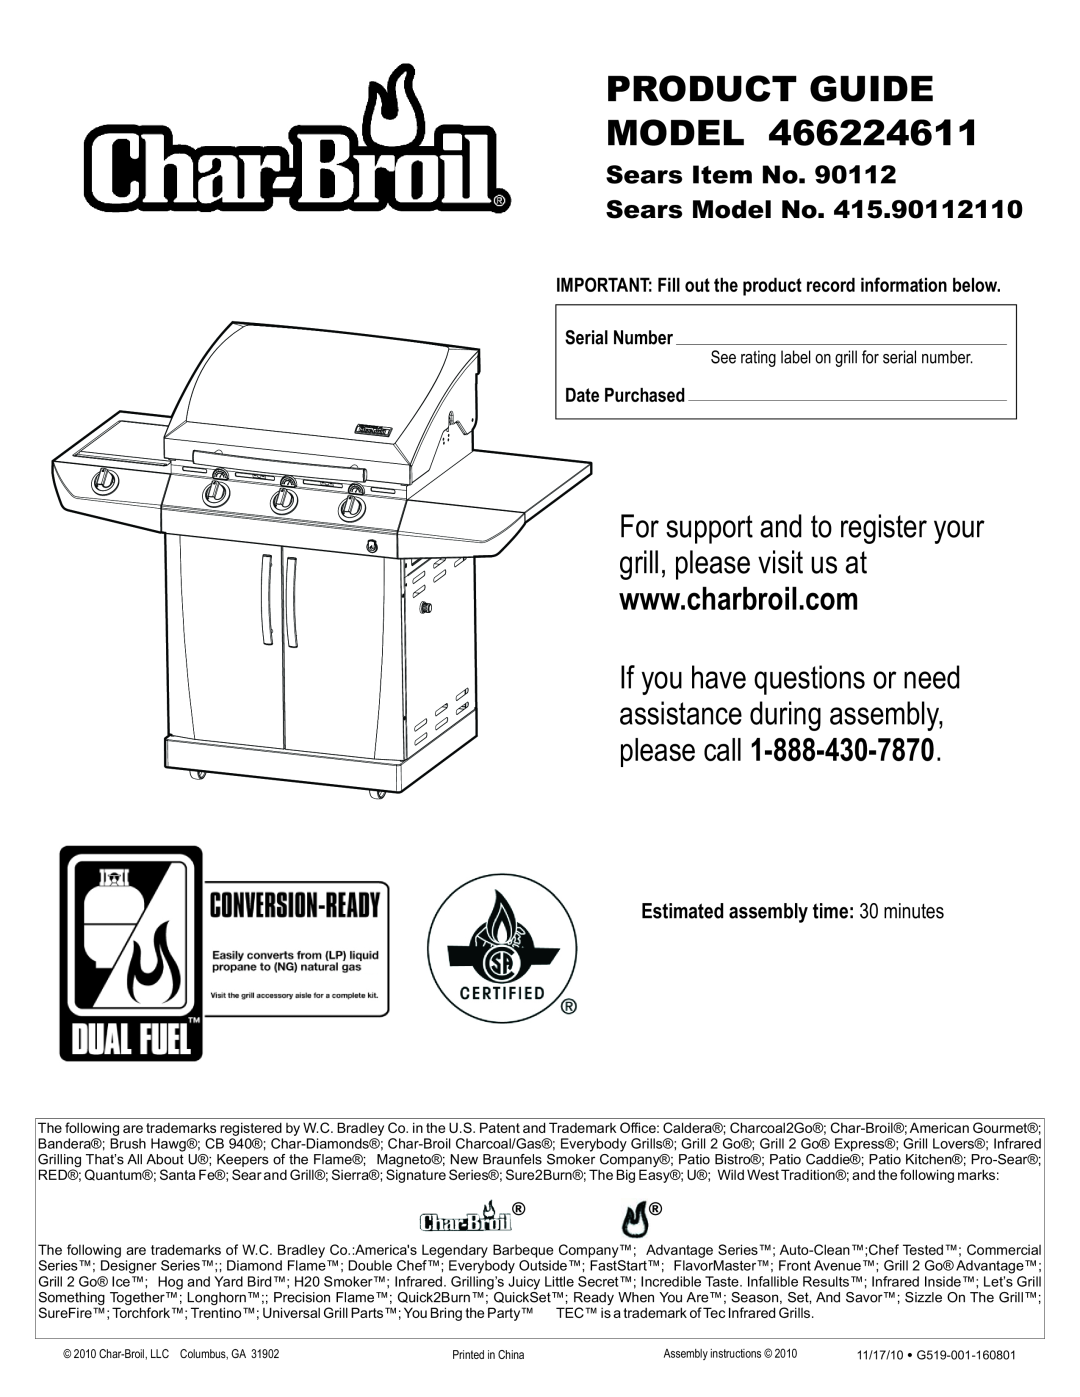 Char-Broil 415.9011211, 466224611 manual please call, Estimated assembly time 30 minutes, Serial Number, Date Purchased 